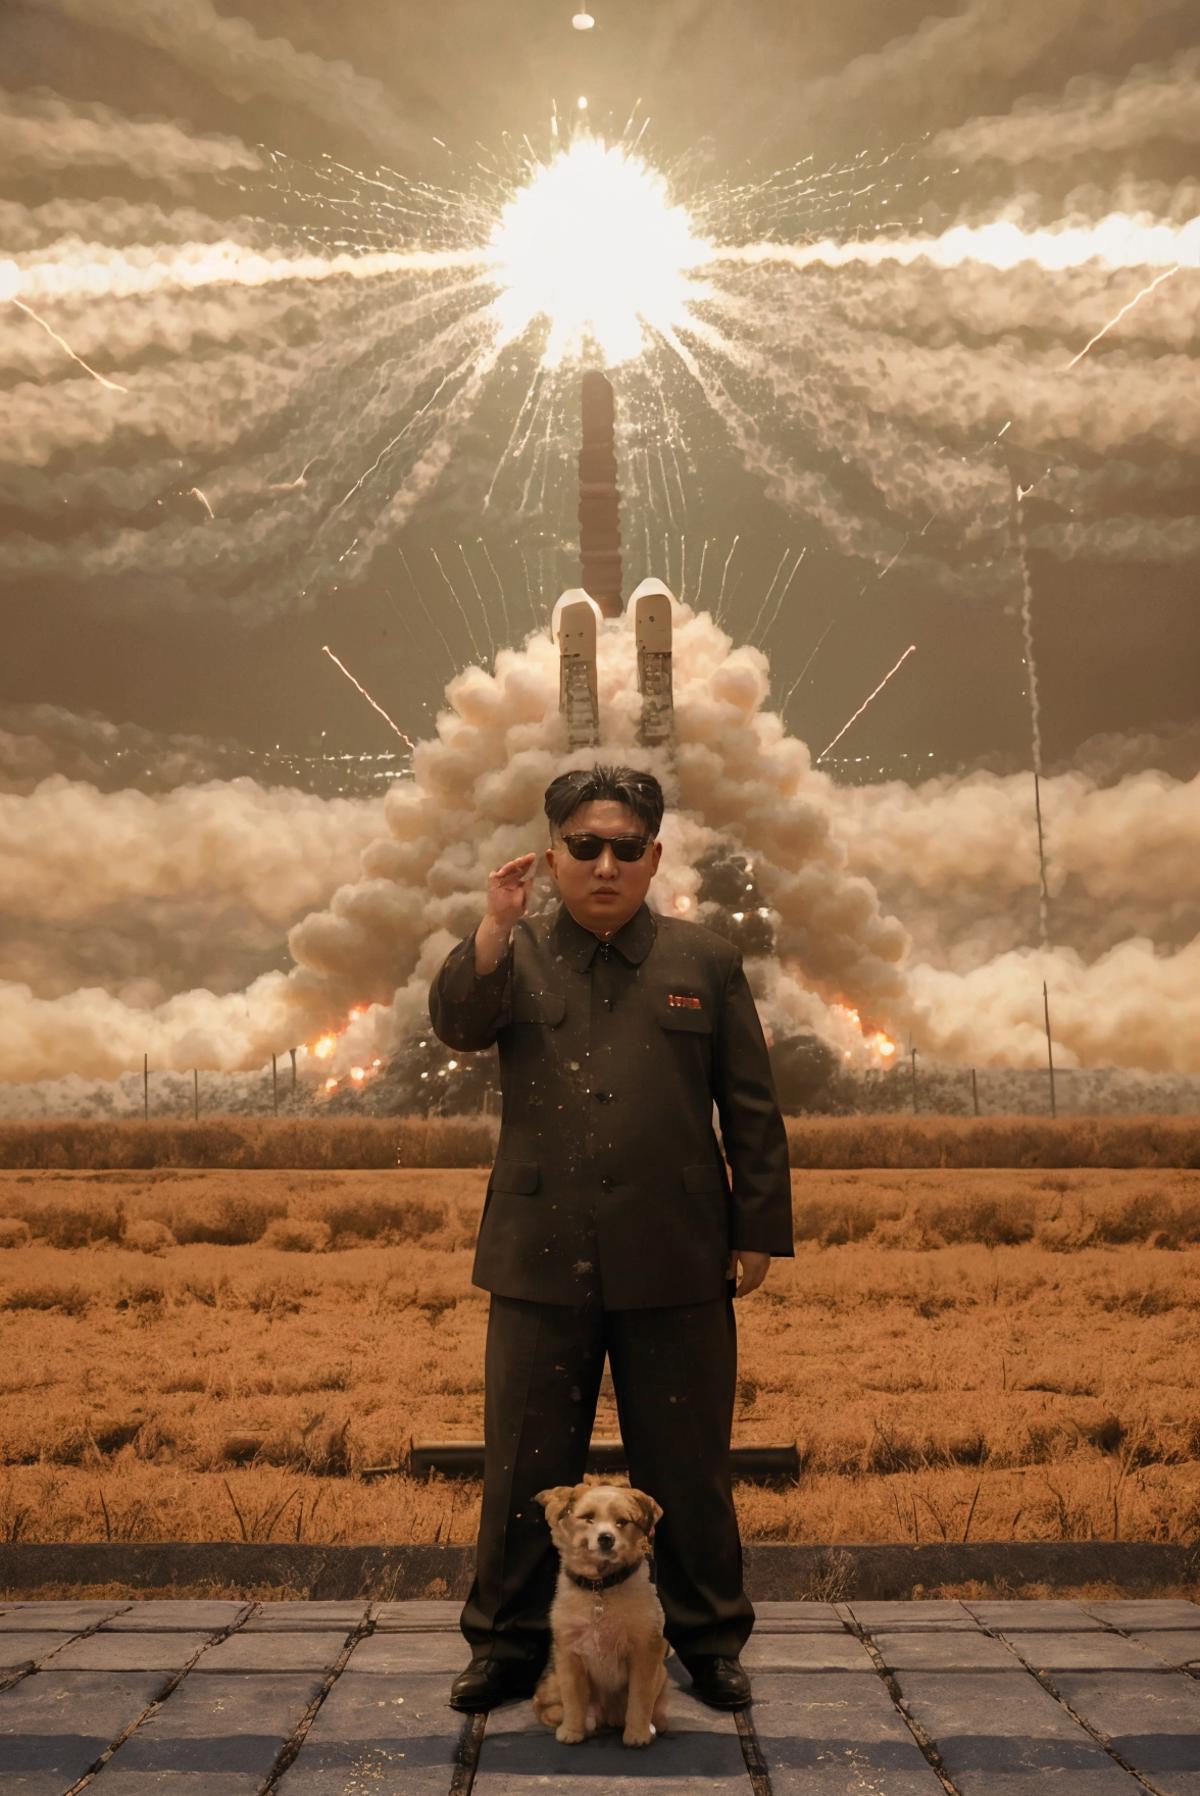 Man with Sunglasses and Tie in Front of Rockets and Explosions